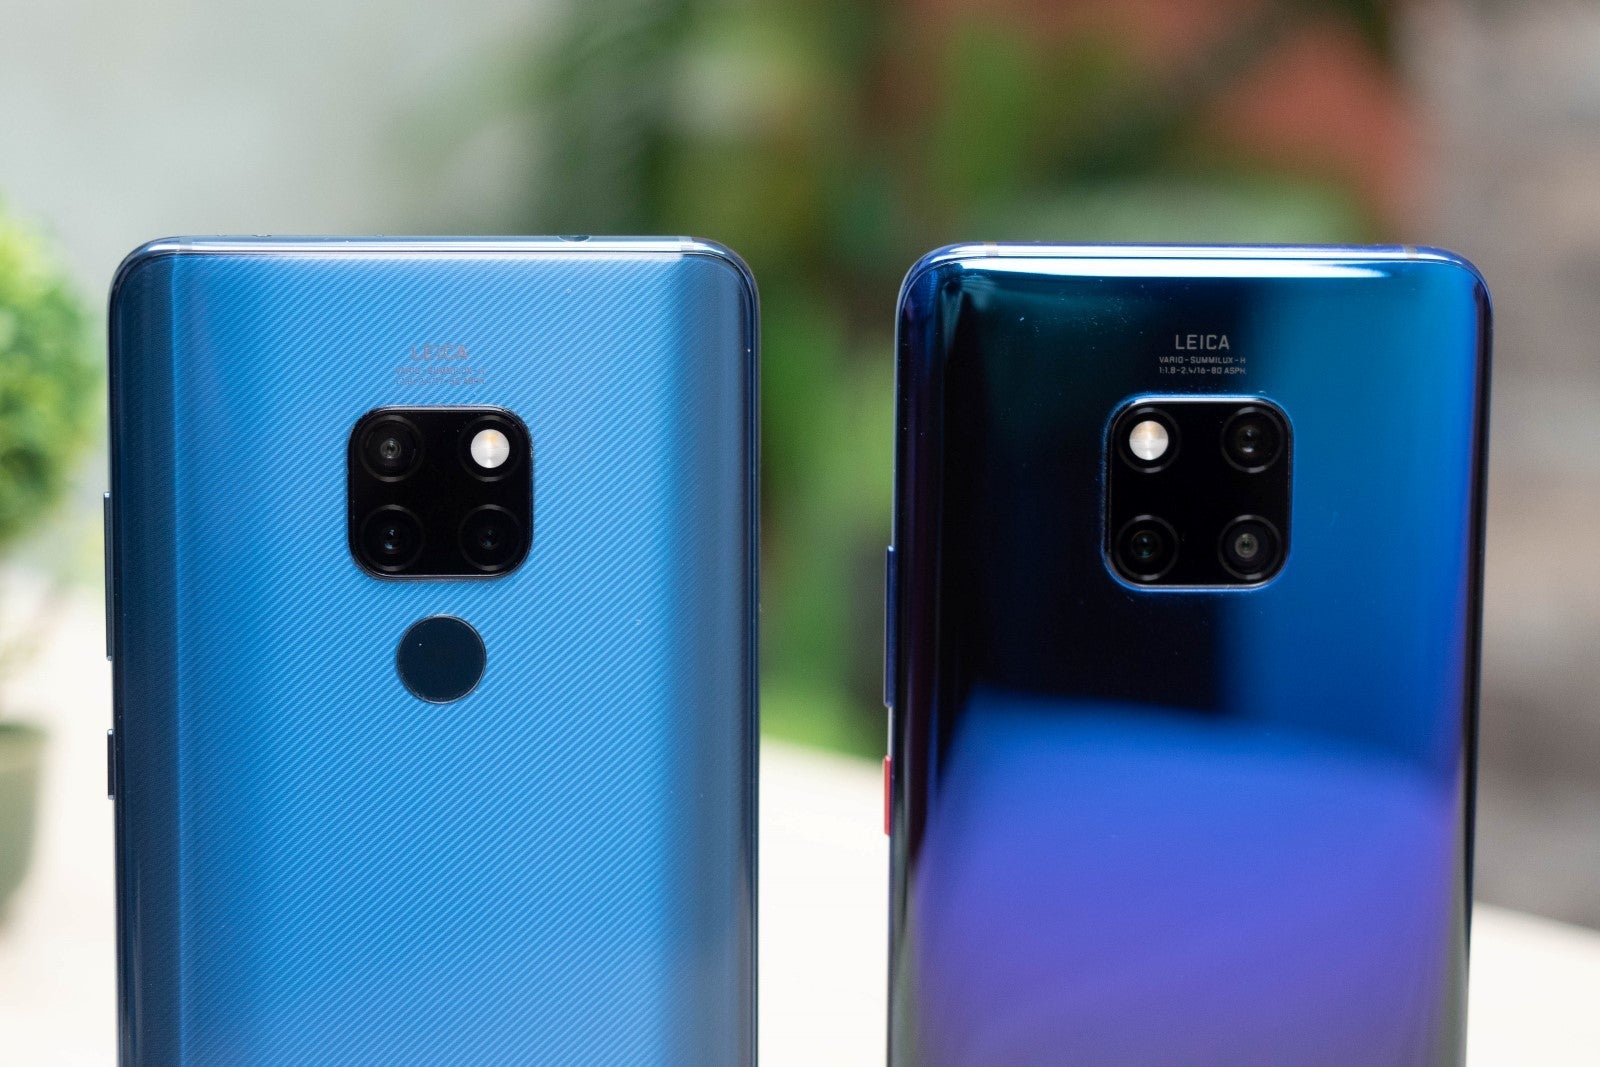 Huawei Mate 20 Unboxing and First look